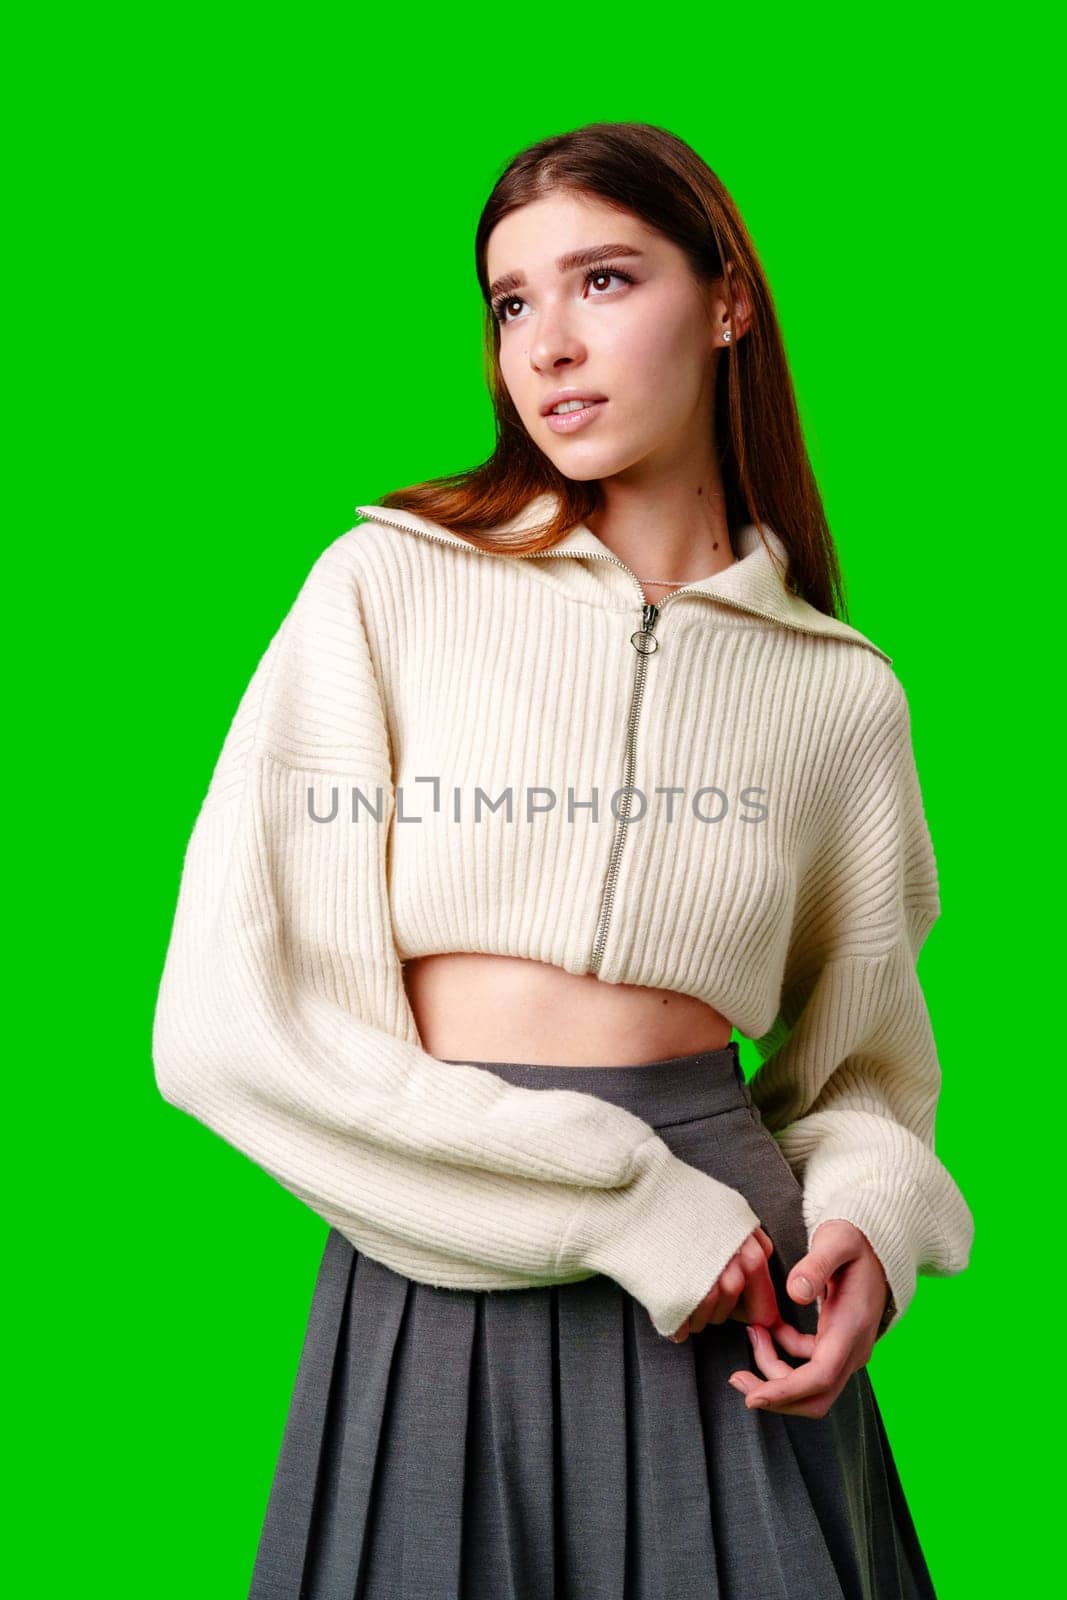 A young woman stands against a vibrant green backdrop, her gaze directed off-camera with a thoughtful expression. She wears a casual, cropped white zip-up sweater paired with a dark pleated skirt, and her long brown hair hangs straight over her shoulders.